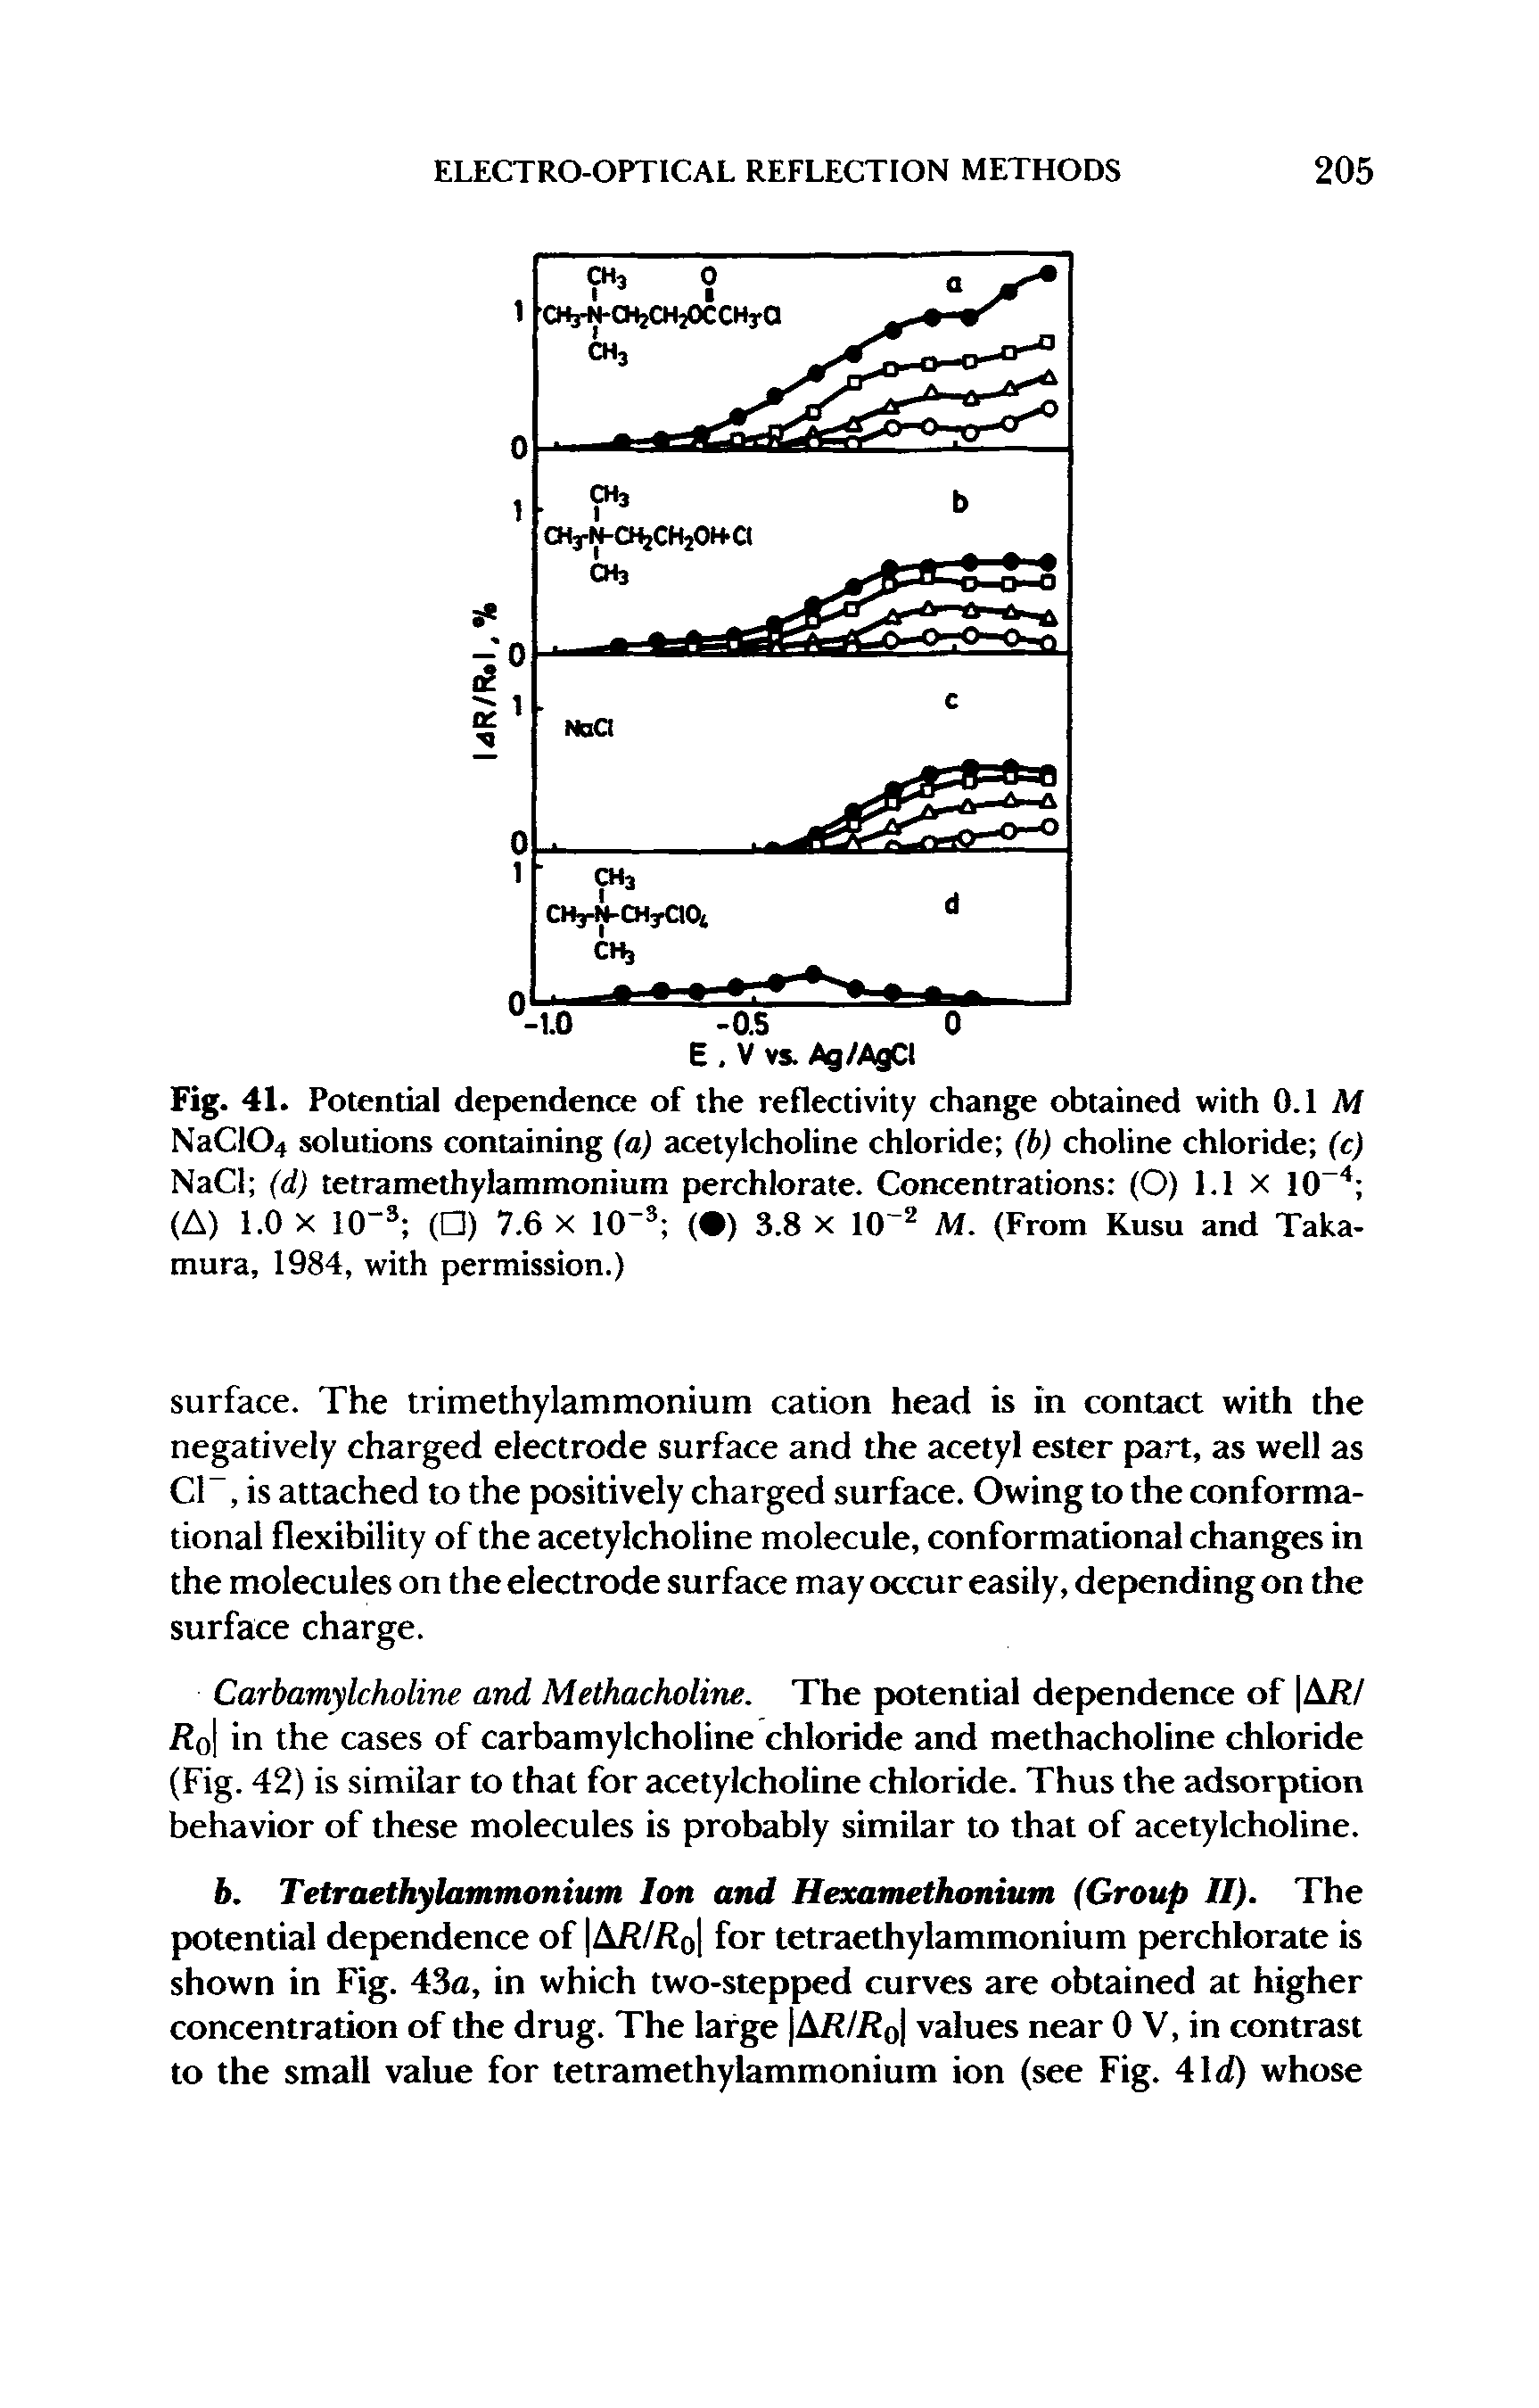 Fig. 41. Potential dependence of the reflectivity change obtained with 0.1 Af NaC104 solutions containing (a) acetylcholine chloride (b) choline chloride (c) NaCl (d) tetramethylammonium perchlorate. Concentrations (O) 1.1 X 10 (A) 1.0 X 10 ( ) 7.6 X 10 ( ) 3.8 x 10 M. (From Kusu and Taka-mura, 1984, with permission.)...